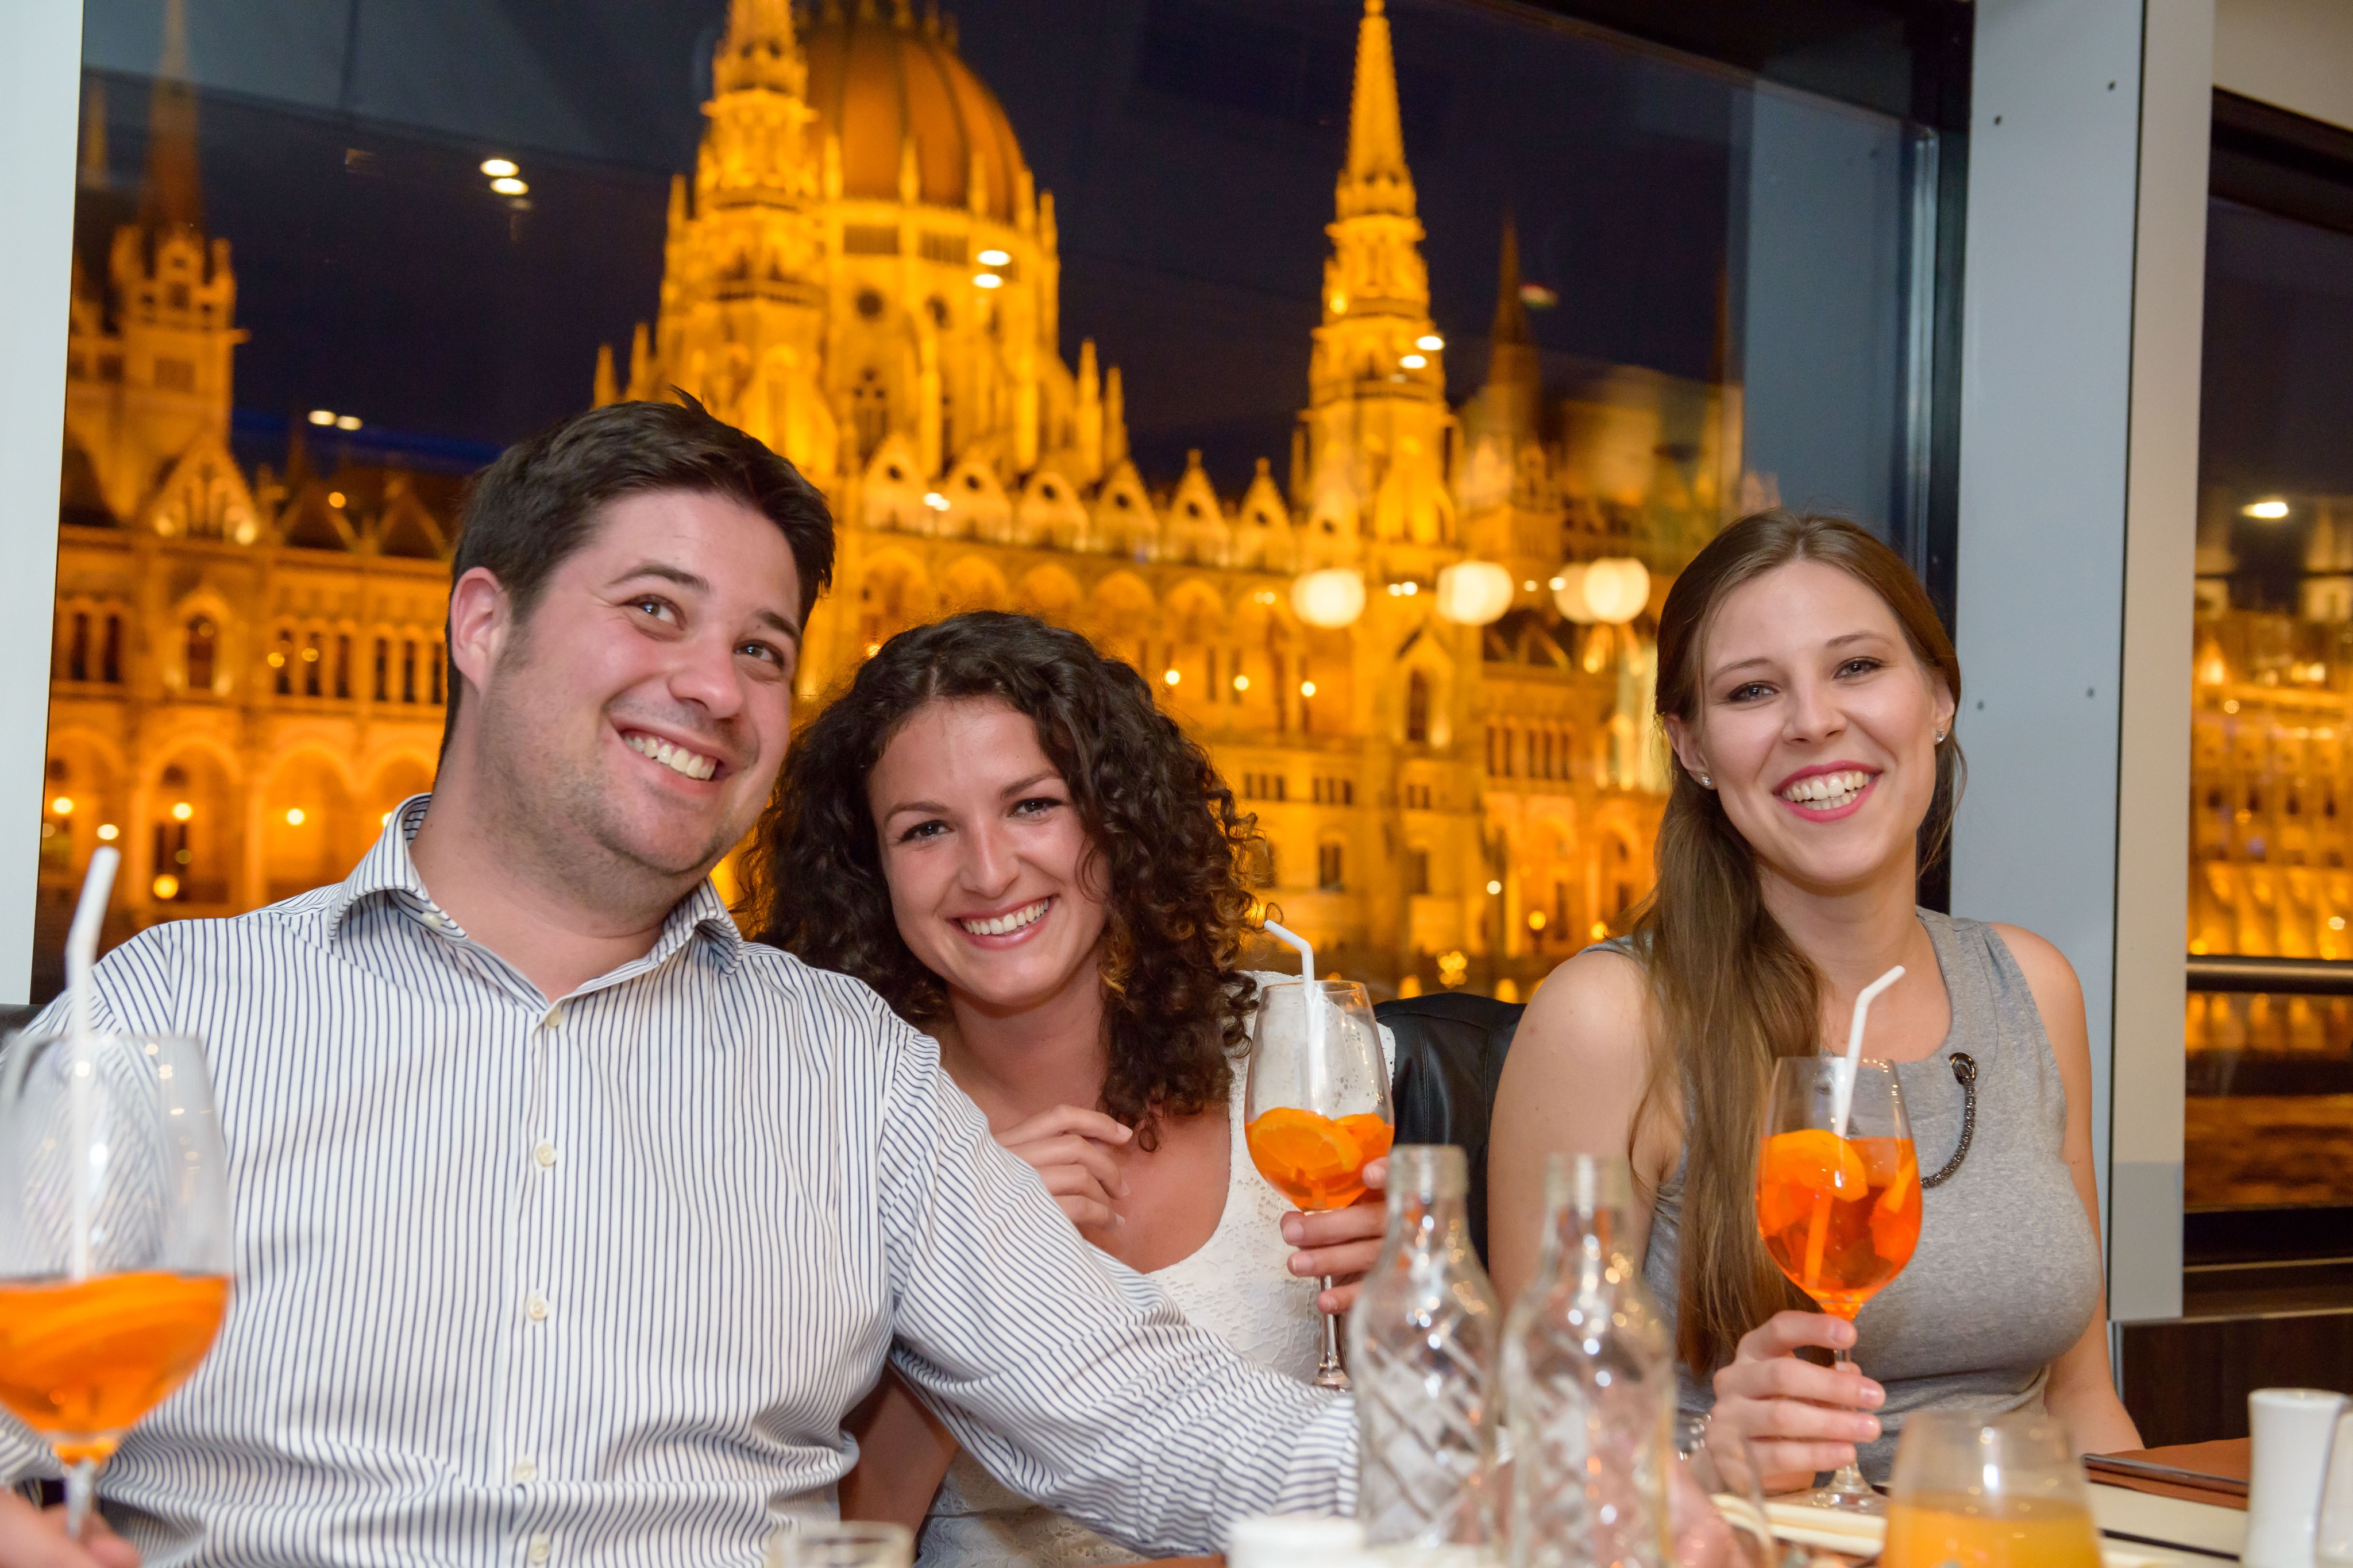 Danube Cruise With Drinks And Piano Battle Show - Budapest - 